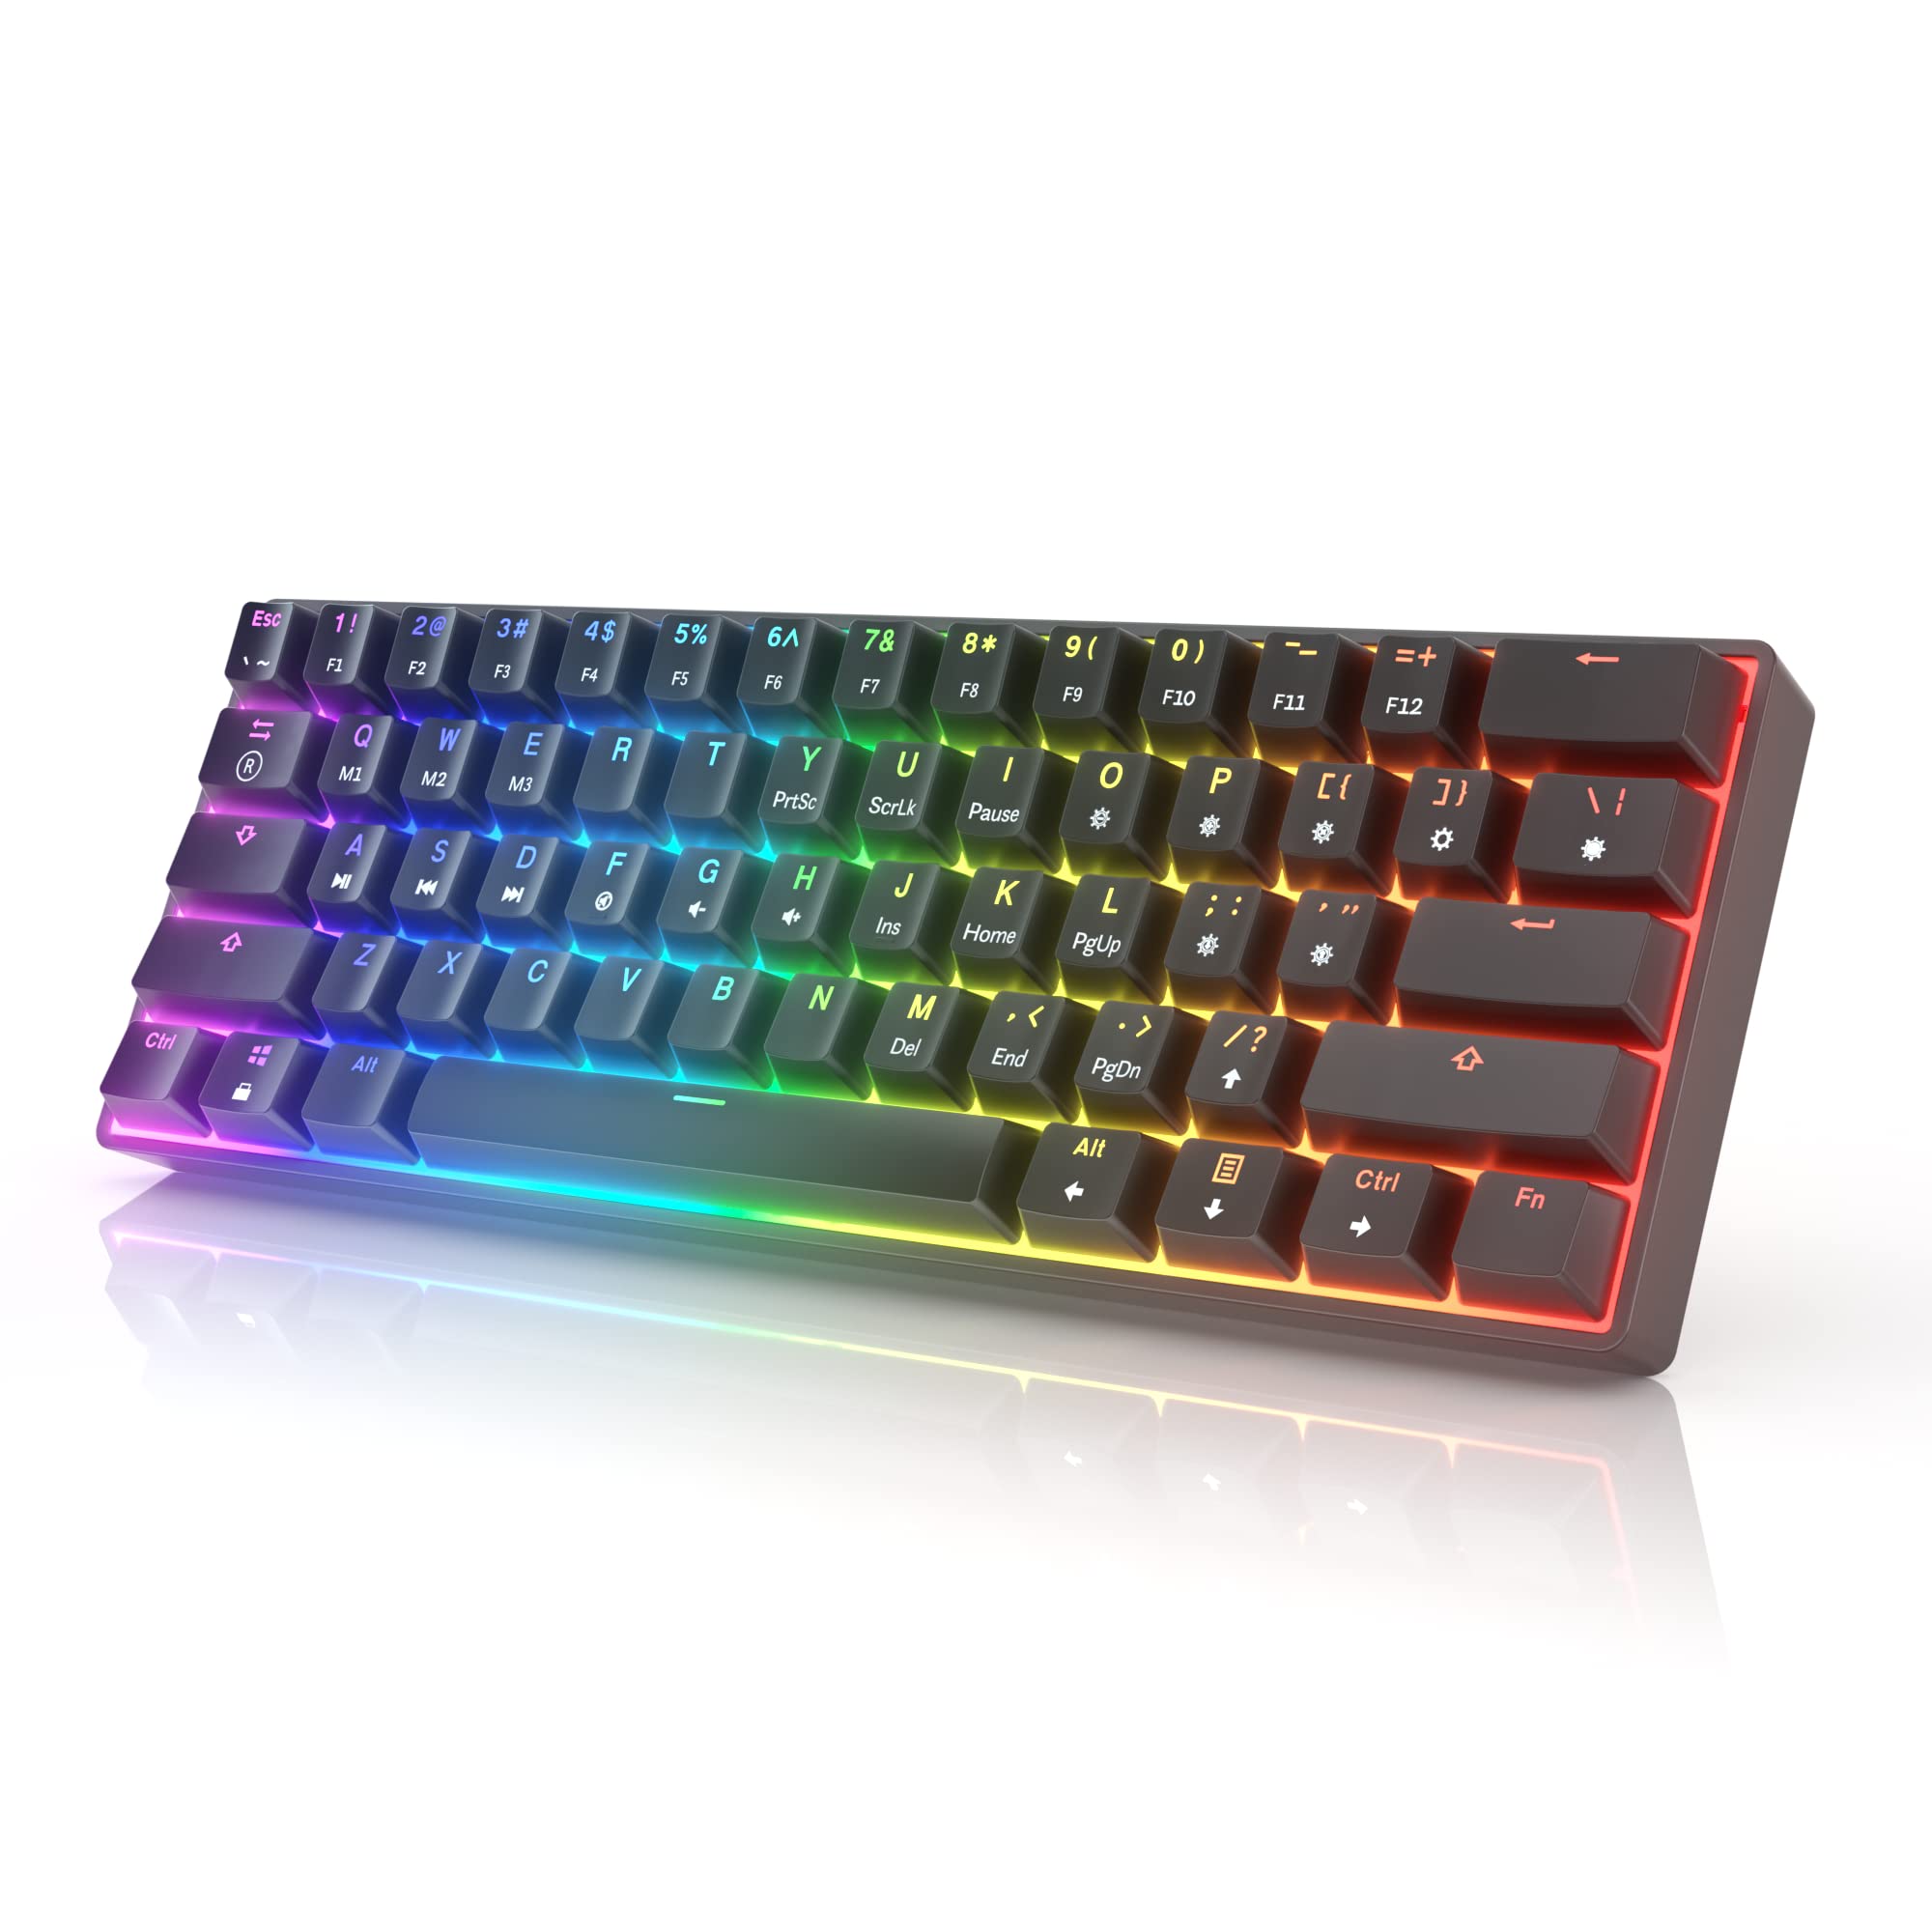 GK61s Mechanical Gaming Keyboard - 61 Keys Multi Color RGB Illuminated LED Backlit Wired Programmable for PC/Mac Gamer (Gateron Mechanical Brown, Black)